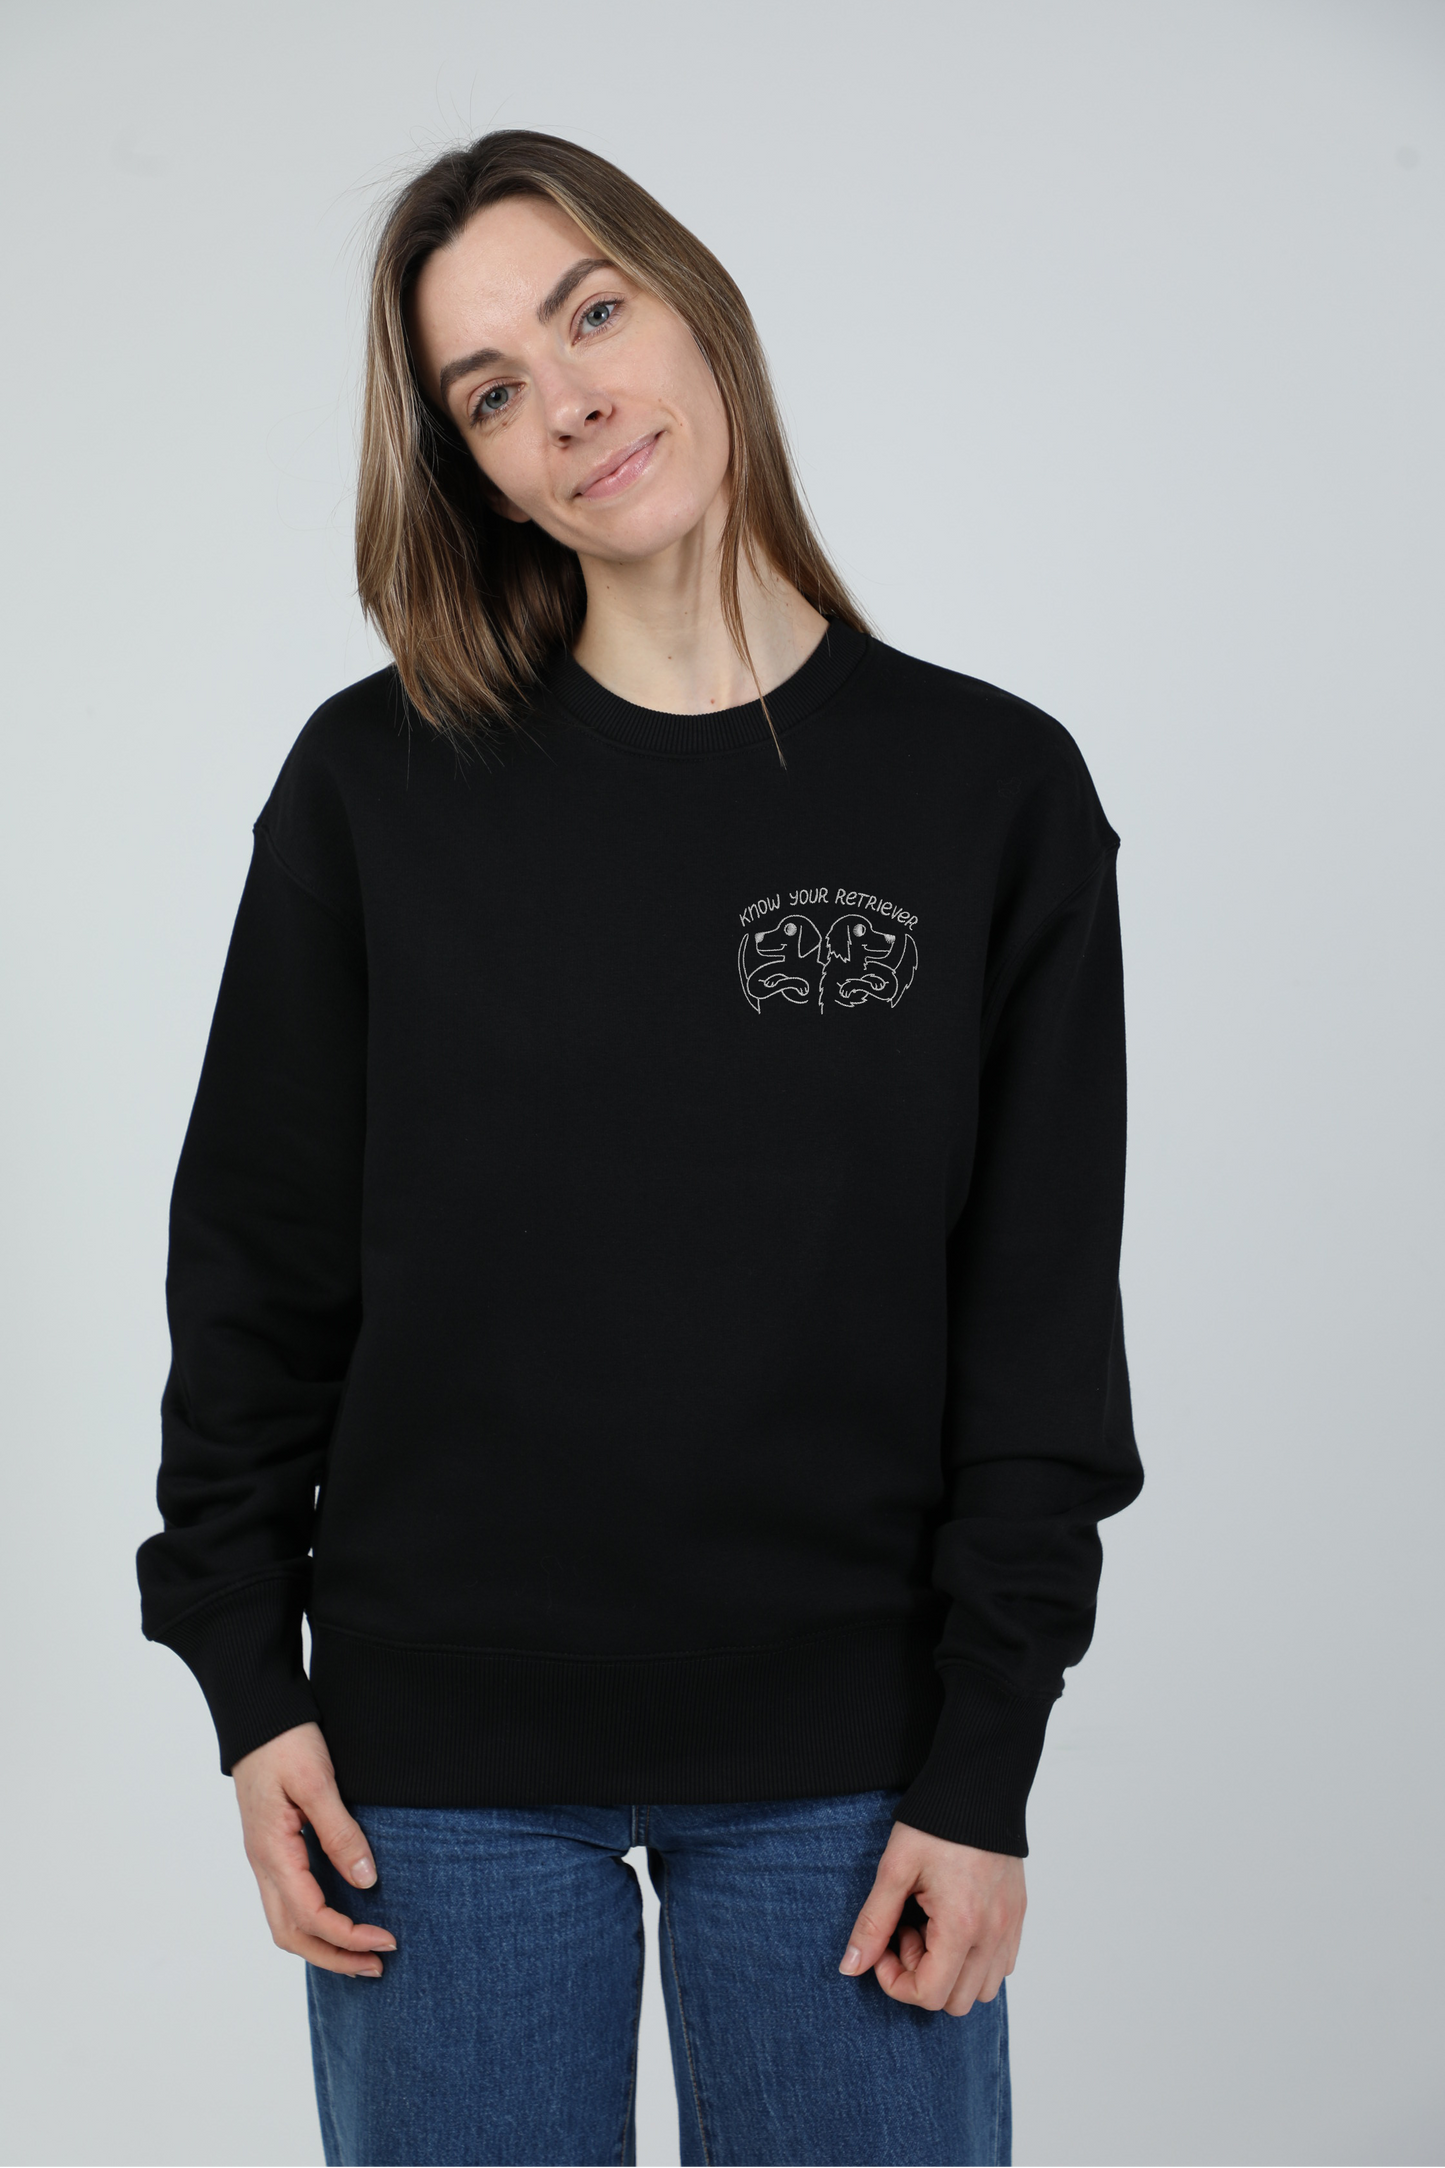 Know your retriever | Crew neck sweatshirt with embroidered dog. Oversize fit | Unisex